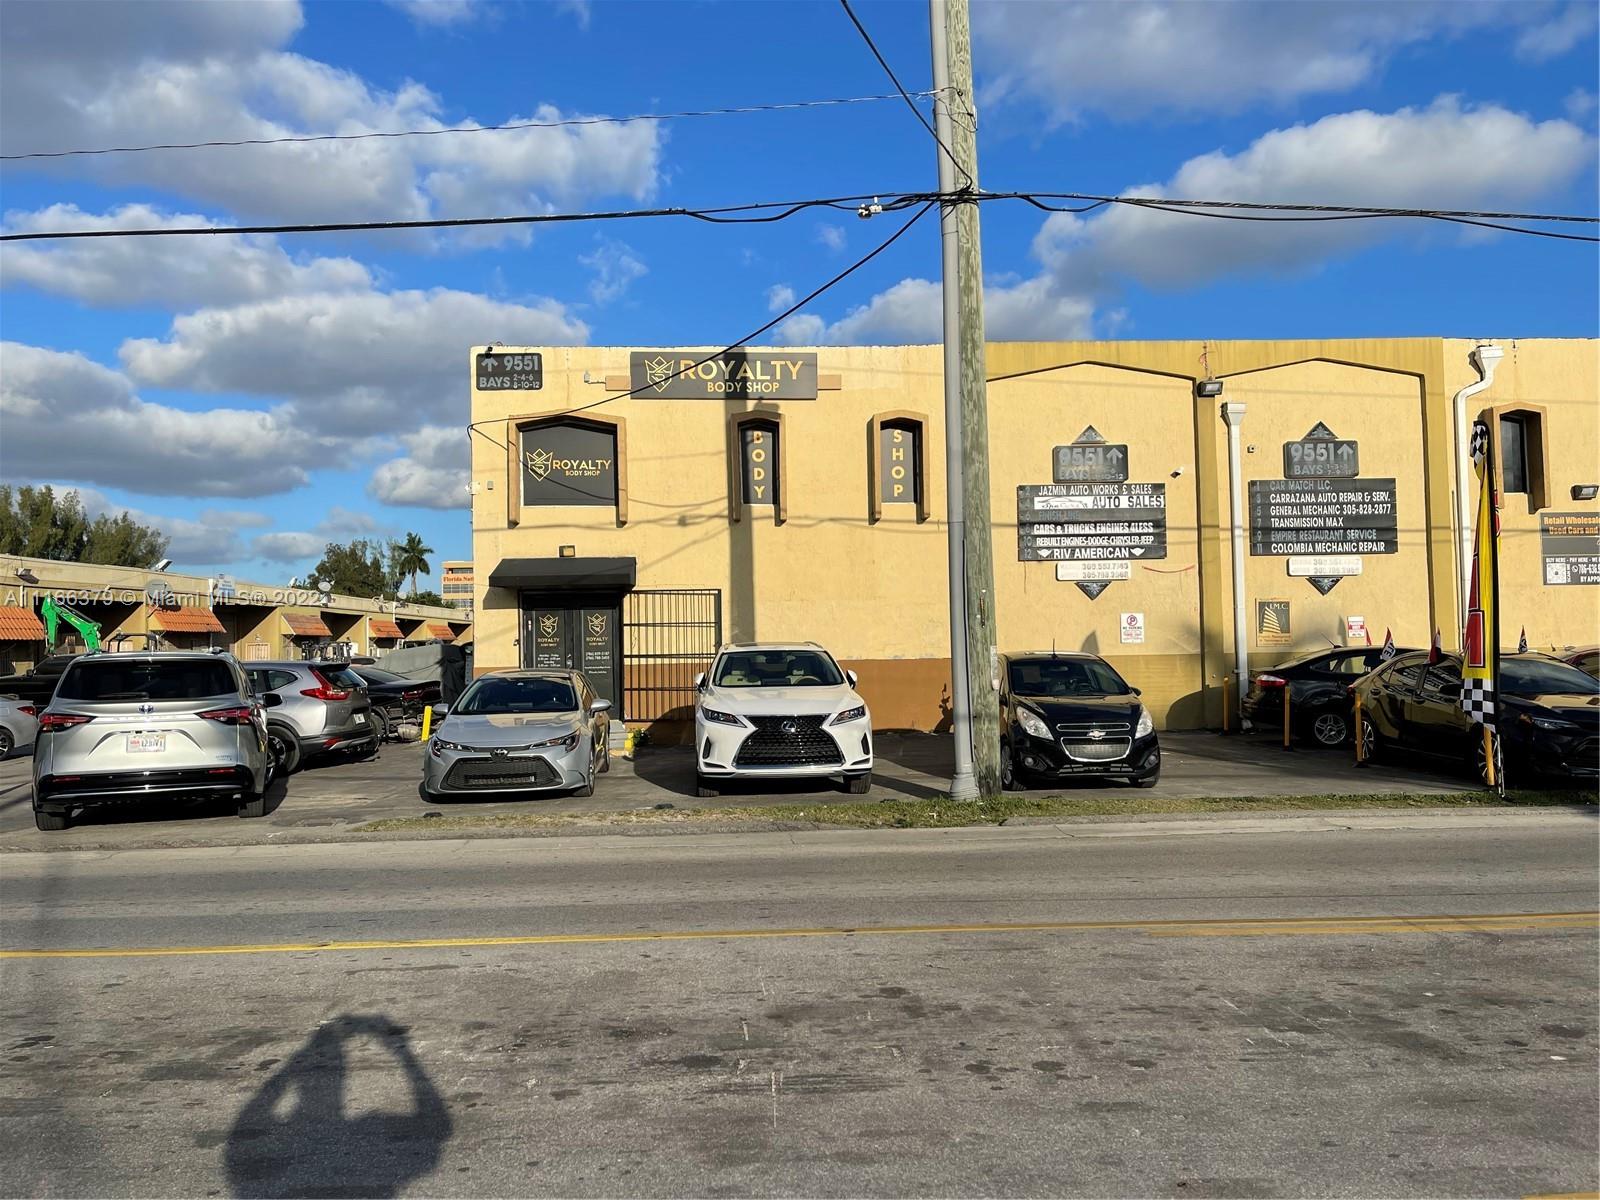 Royalty Body Shop the Art Collision Repair & Paint Center for sale in Hialeah-PRIME location-close to Okechobee and Palmetto Xpressway & MIA. an Asset sale with lease. All equipment, multiple lifts, frame machine/computer, compressors, tools, supplies,& Inventory, also offices & storage rooms, reception/waiting area, and bathrooms. The business includes a 2nd collision repair-only shop, Business services all makes & models, has all licenses/permits up-to-date-Great opportunity for Business sales of insurance claims, Please do not engage employees -we do not want to hurt the business. Monthly rental of the commercial premises of $6400.00, recently signed 5-year rental contract, 7500sqf.  Call us anytime, WE ANSWER!